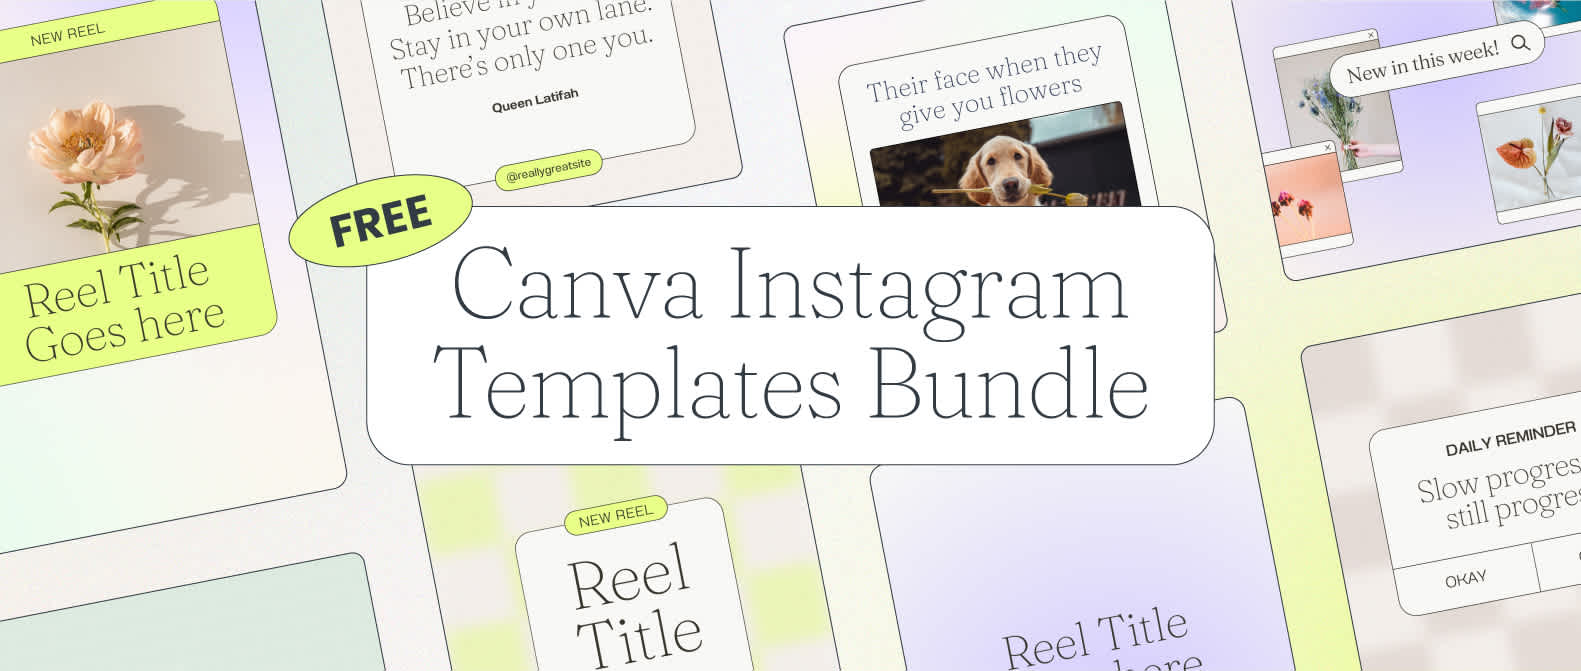 Decorative header for Later’s free instagram canva templates